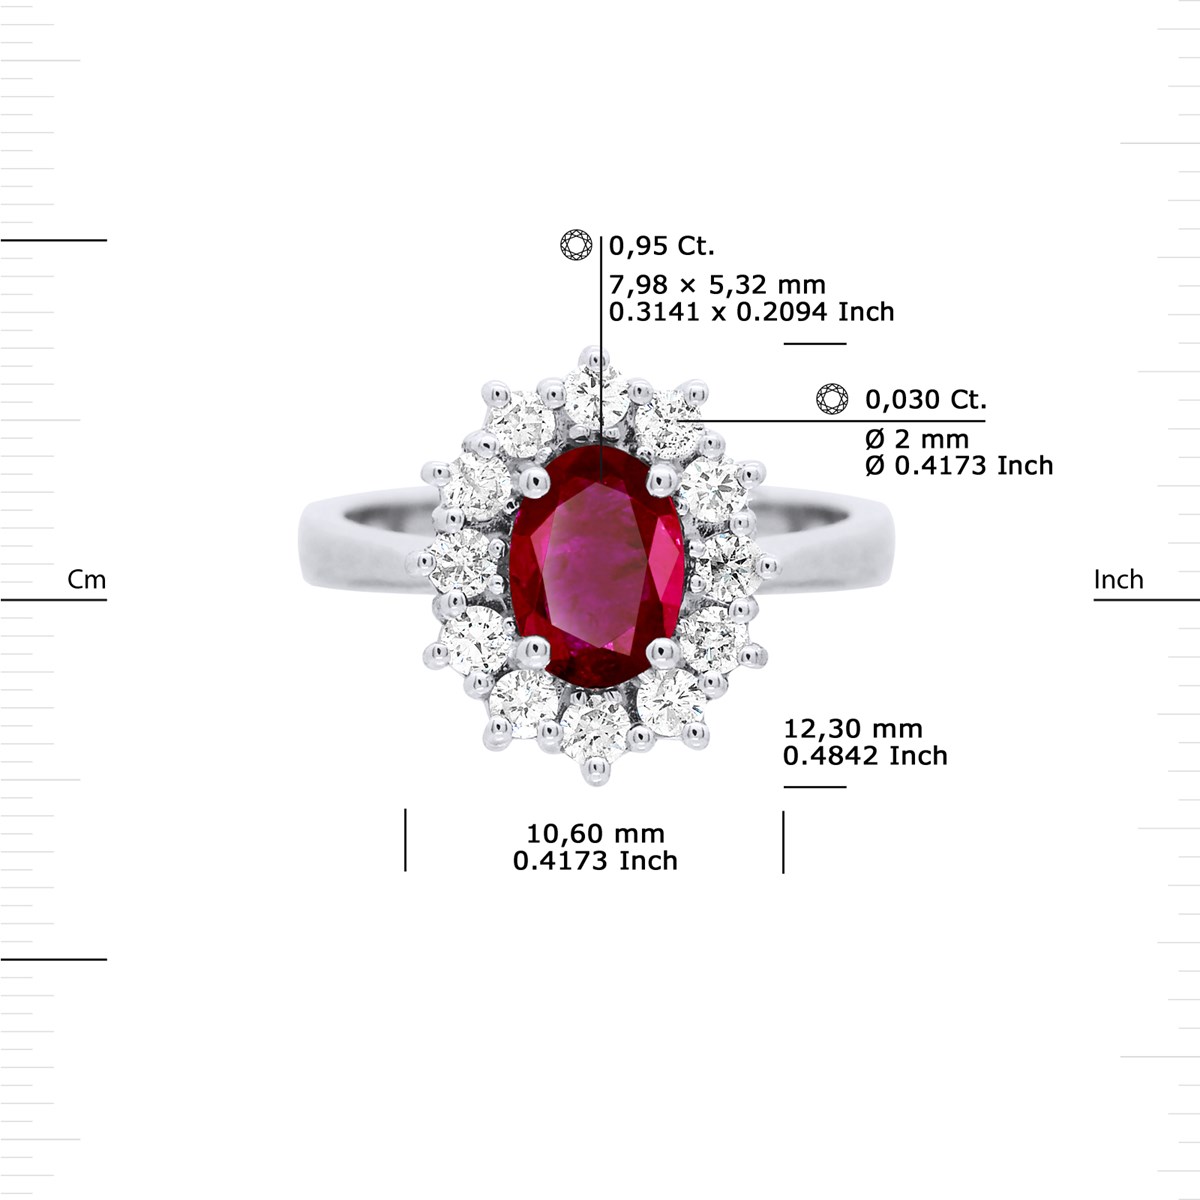 Bague Marquise RUBIS 0,95 Cts Diamants 0,36 Cts Or Blanc 18 Carats - vue 3